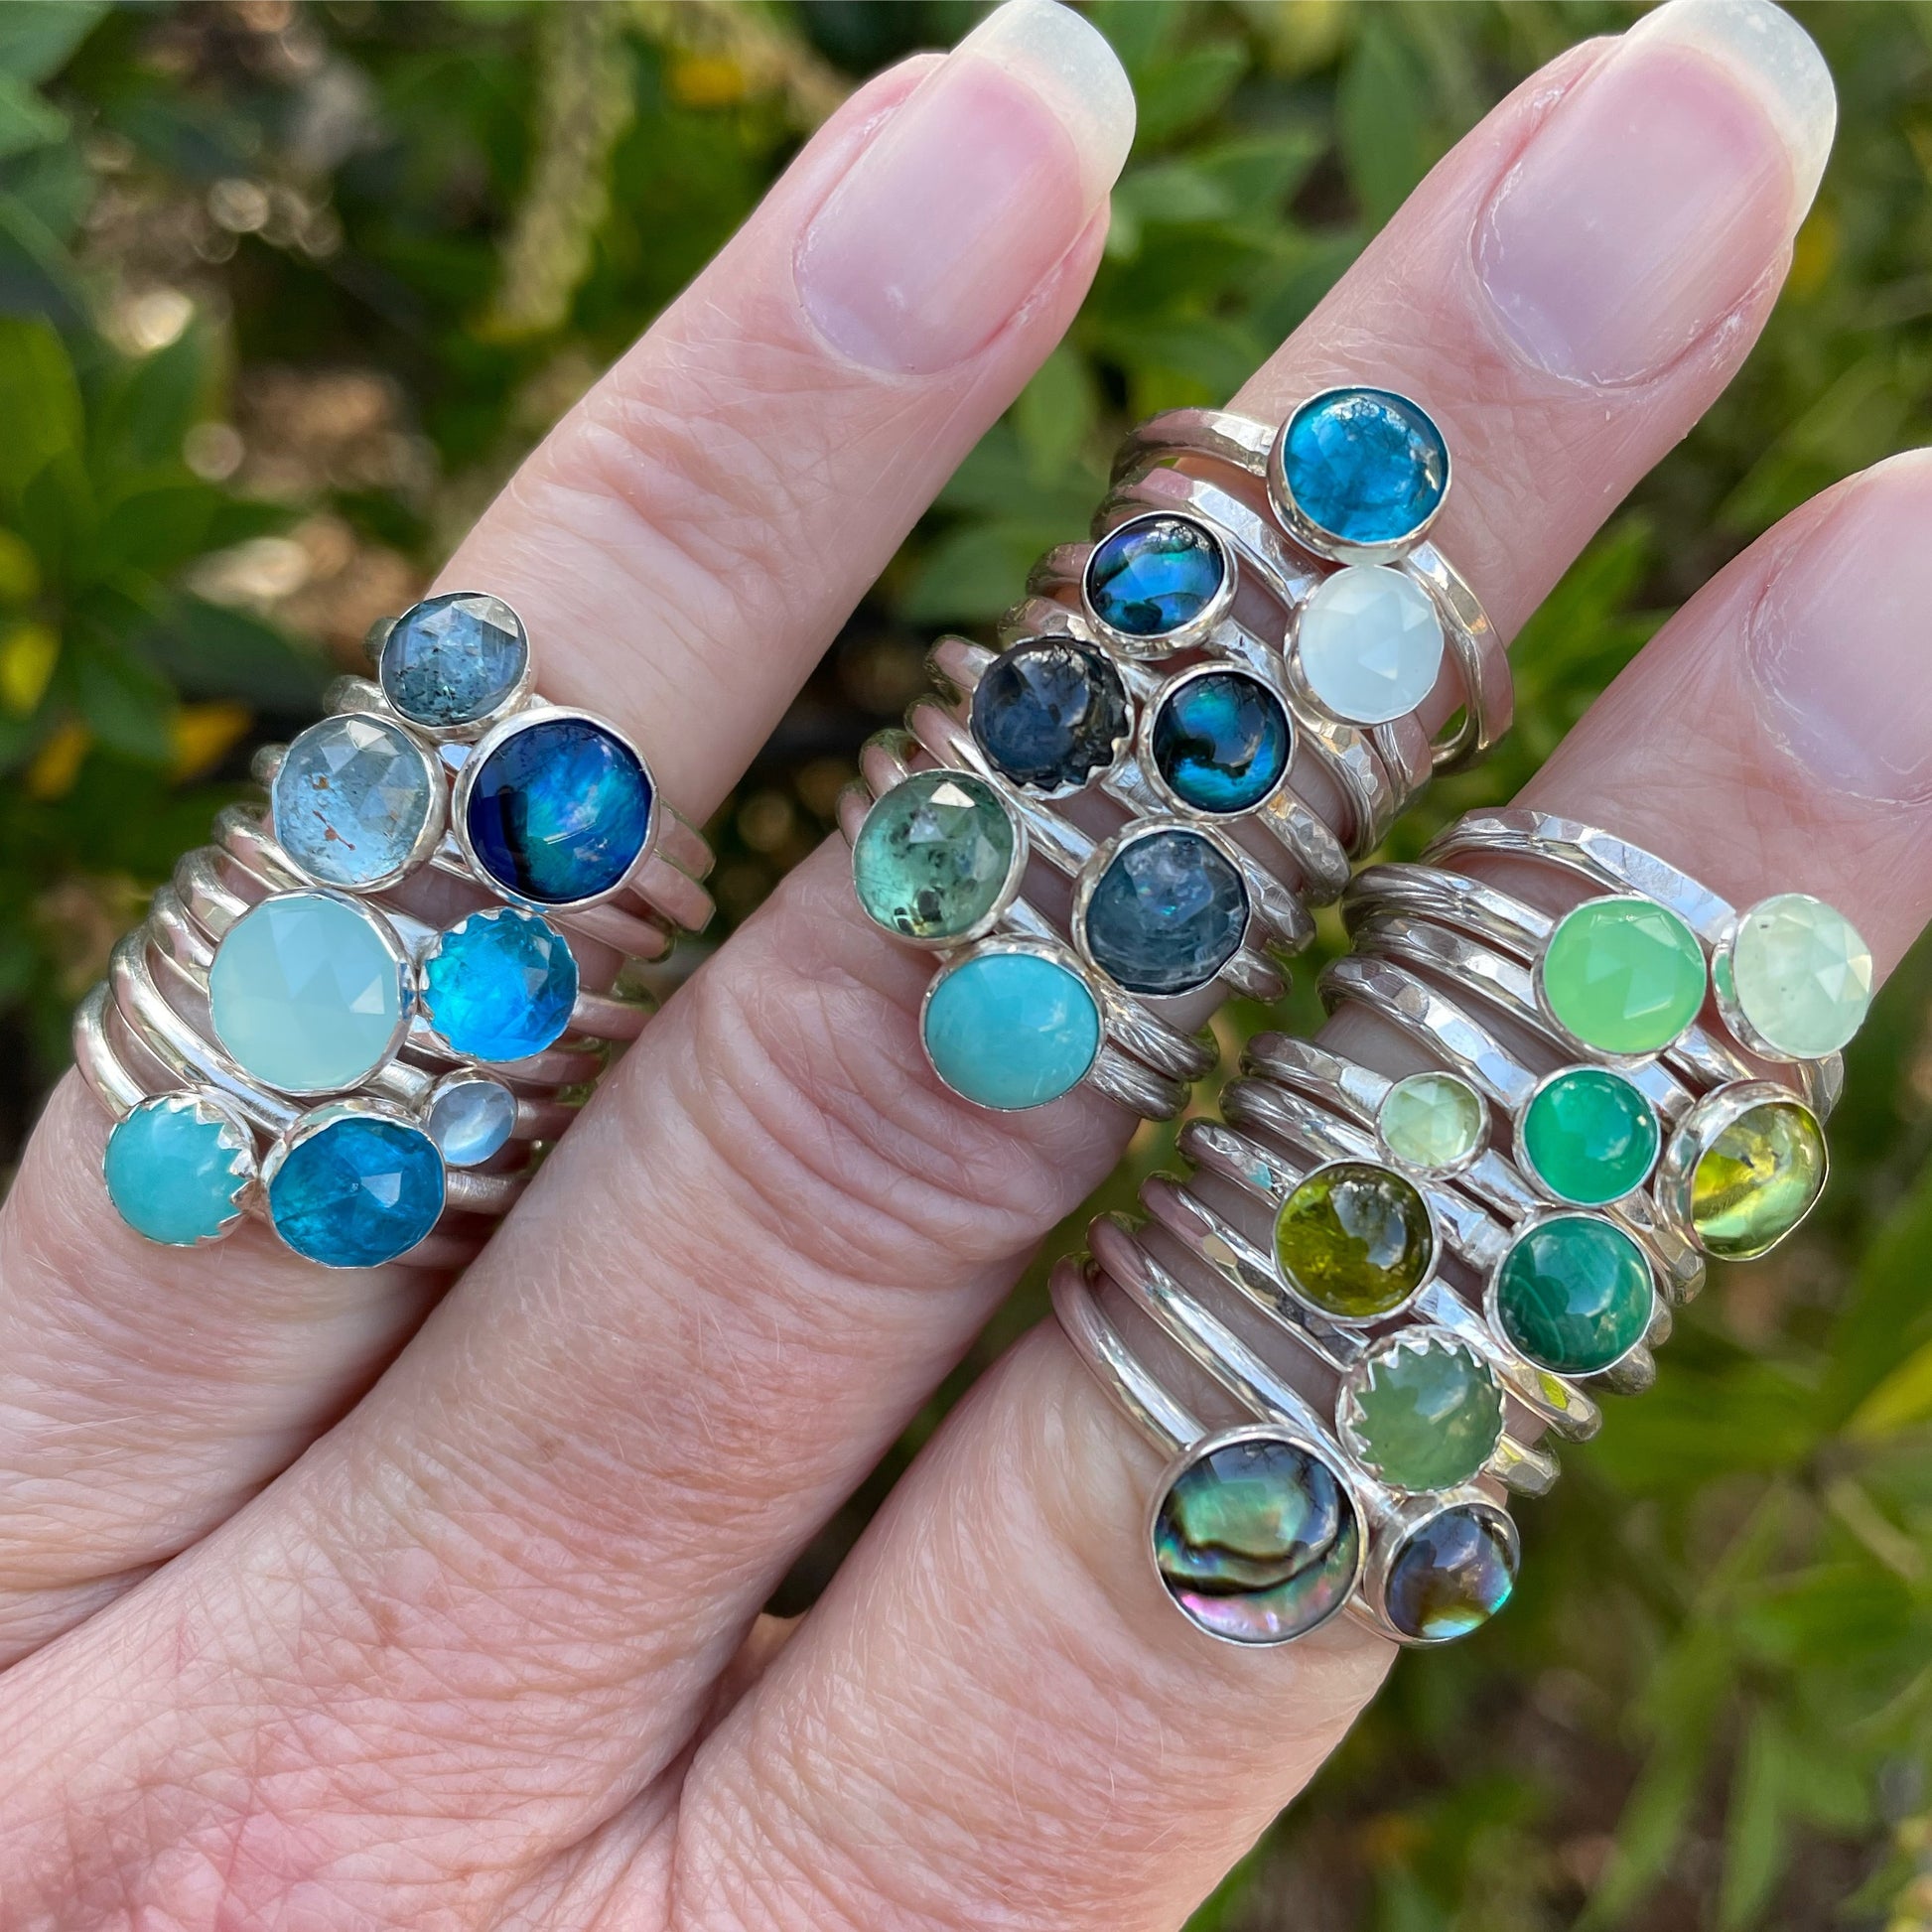 A collection of handmade blue and green gemstone stacking rings modeled on several fingers. 